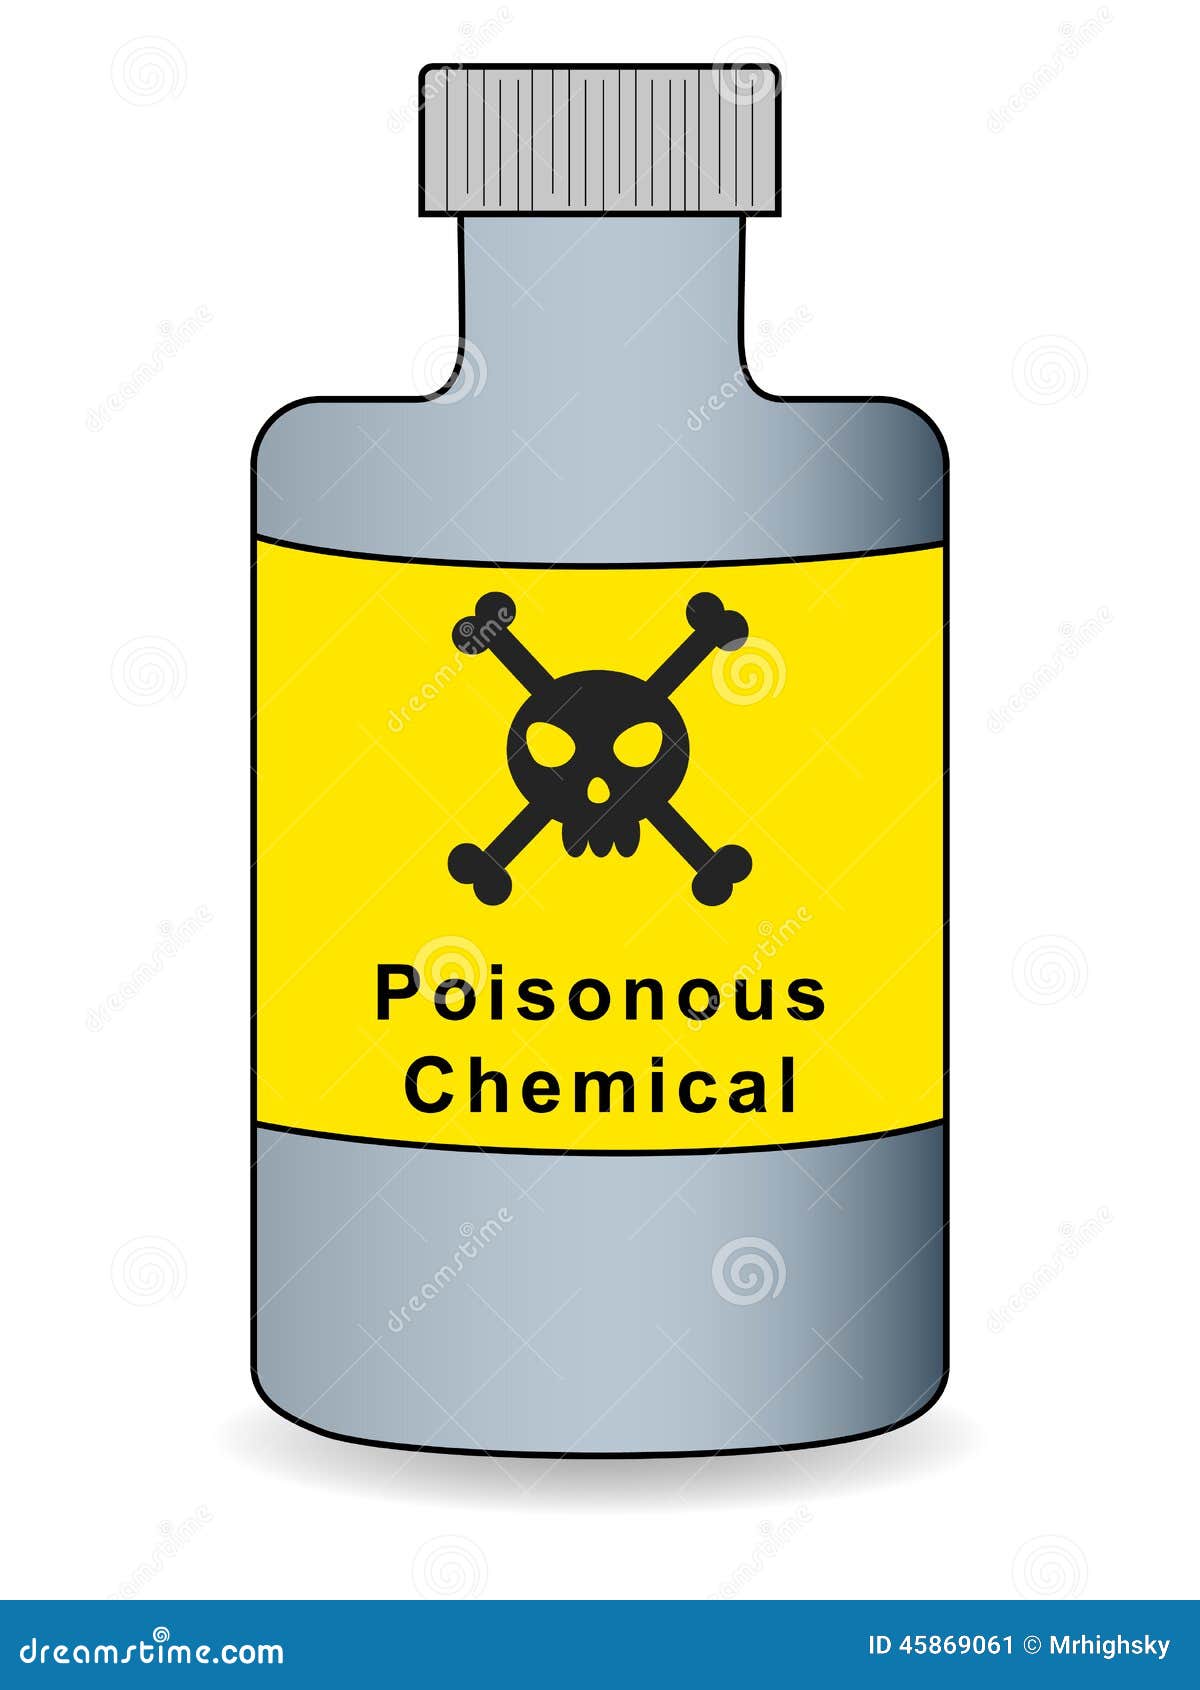 Poisonous Chemical Bottle Stock Vector - Image: 45869061